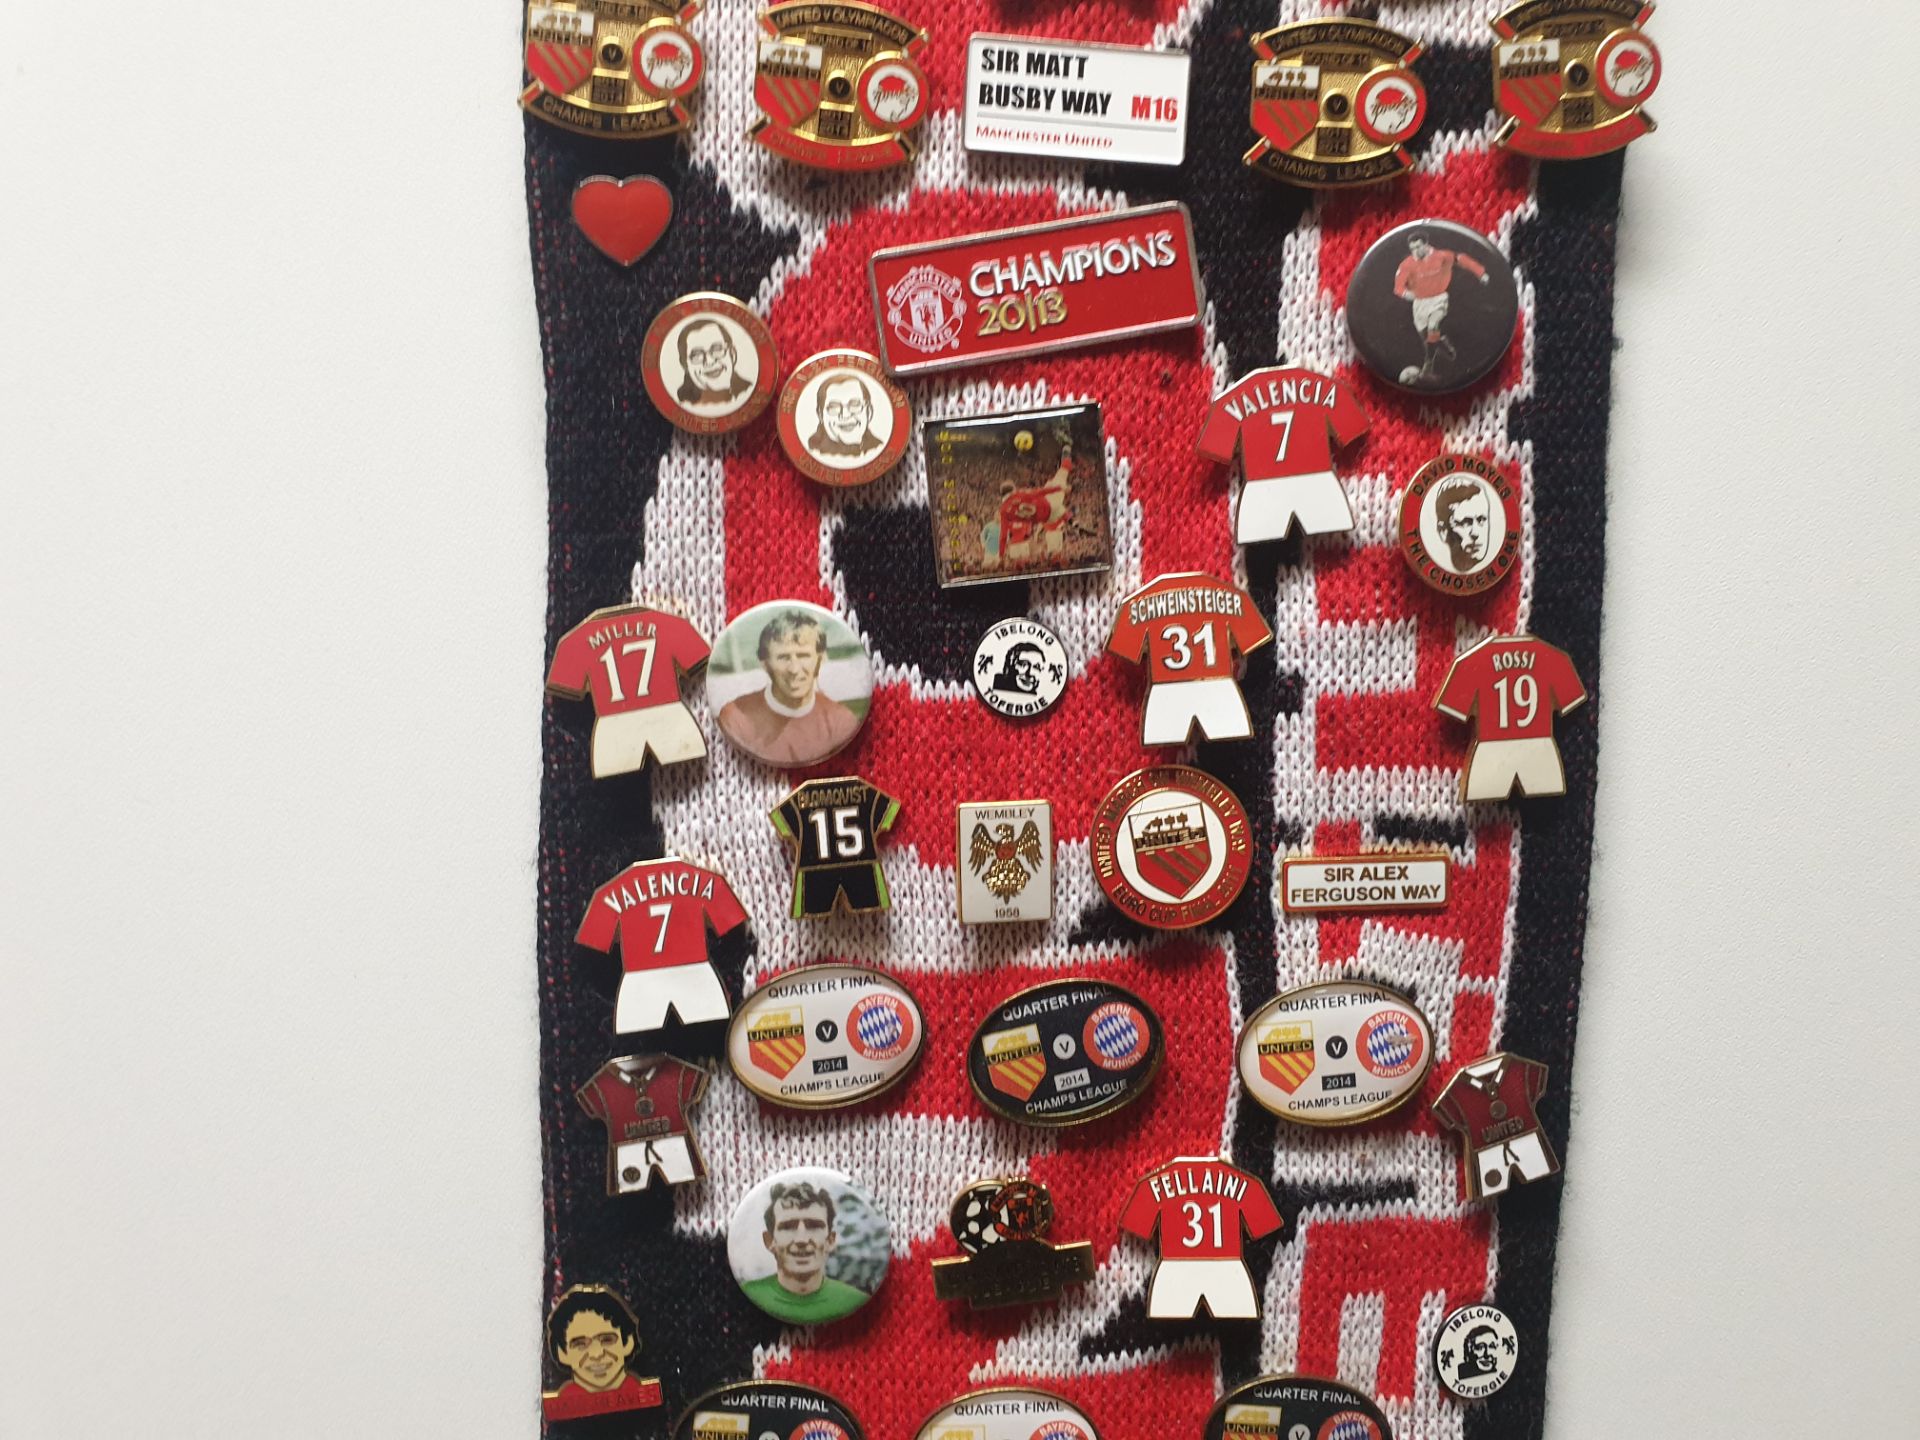 MANCHESTER UNITED SCARF CONTAINING APPROX 170 X PIN BADGES IE CHAMPIONS 2013, SIR ALEX FERGUSON WAY, - Image 5 of 8